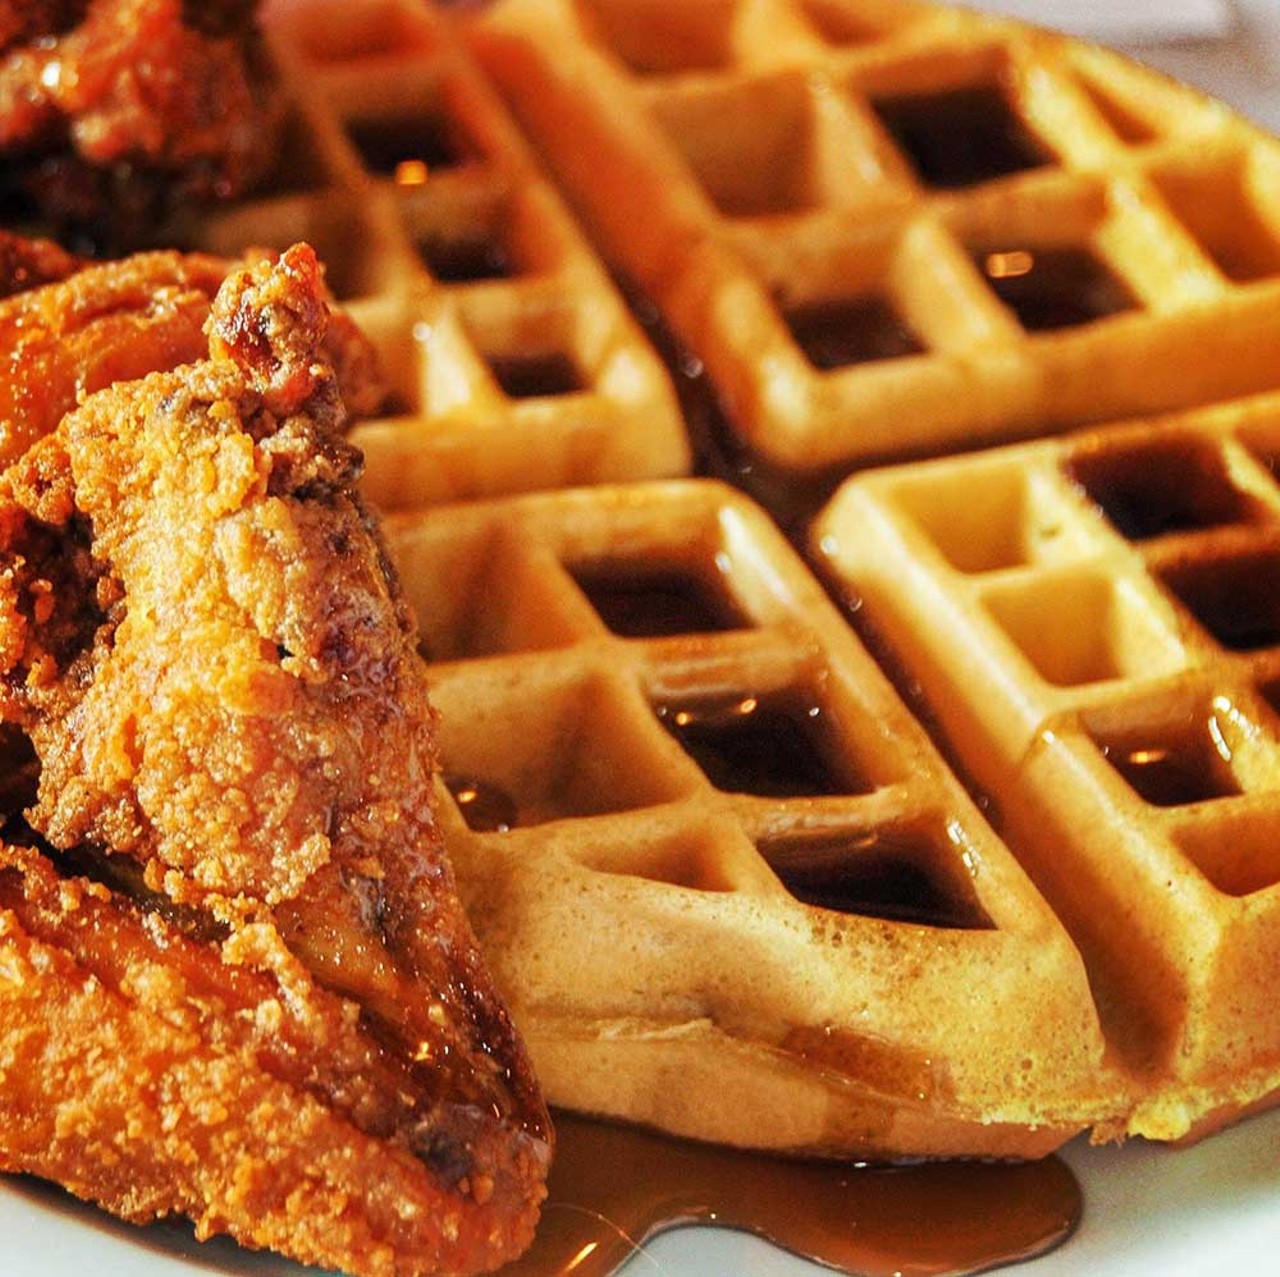 Participating restaurants and dishes they are serving:
Cornbread - Belgian waffle with chicken wings